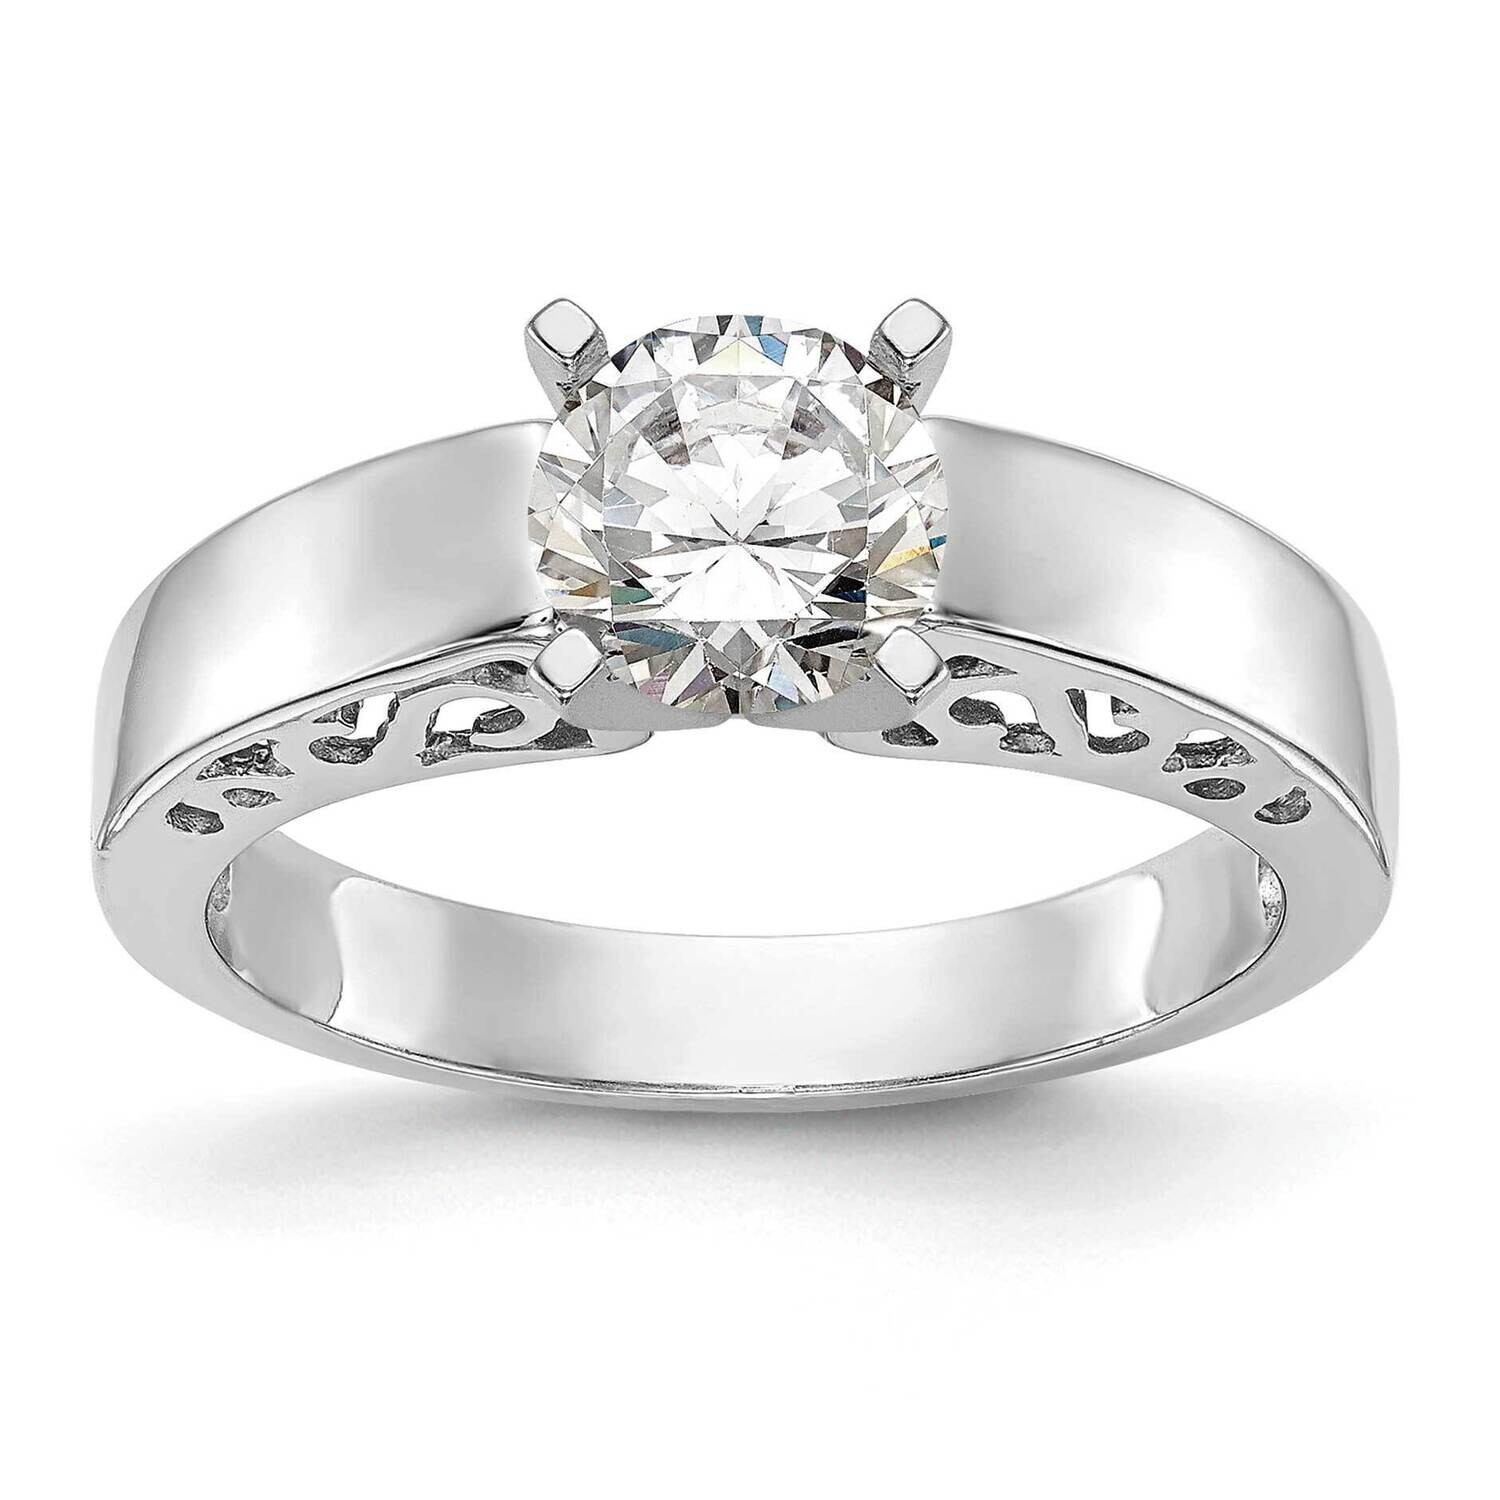 Peg Set Filigree Solitaire Engagement Ring Mounting 14k White Gold RM1987E-CWAA